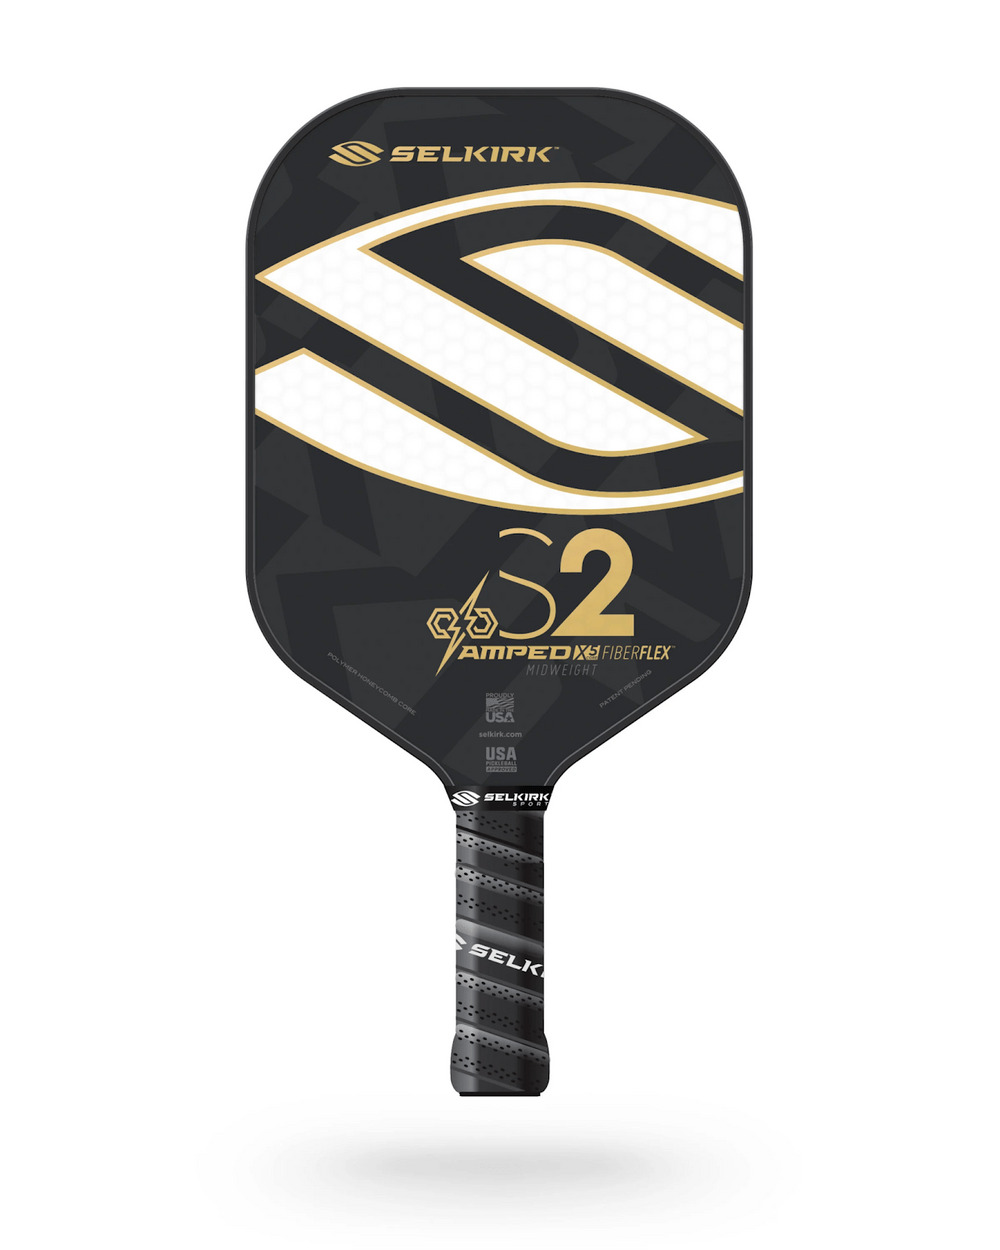 The Selkirk S2 Amped paddle by Selkirk Sport. A great paddle with a slightly shorter handle and standard grip.